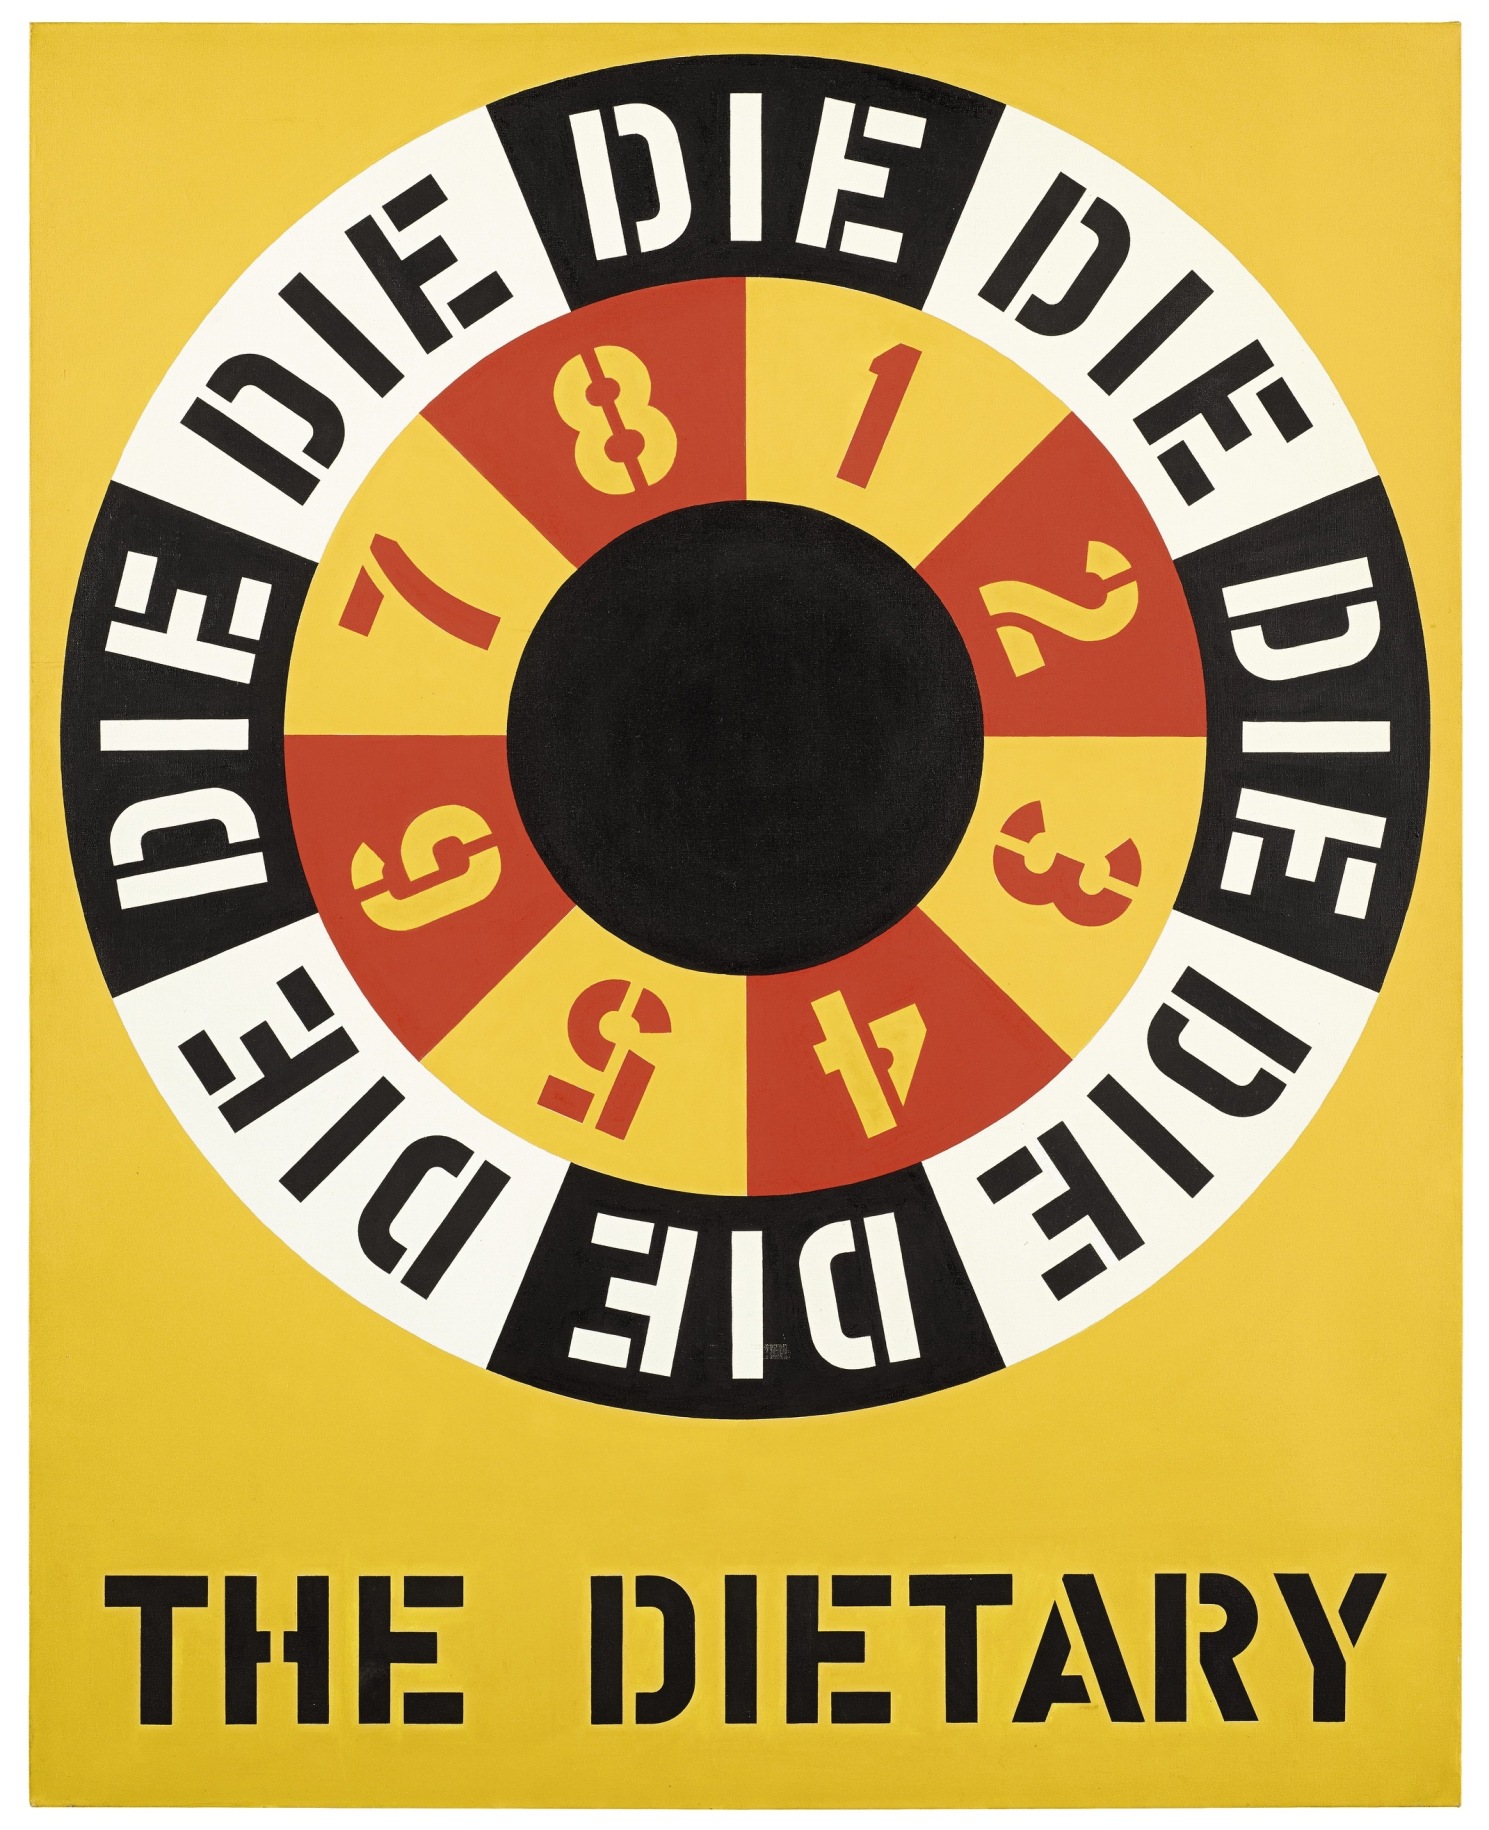 A 60 by 48 inch painting consisting of a large circular design and text against a yellow ground. The work's title, &quot;The Dietary,&quot; appears in black stenciled letters across the bottom of the canvas. Above this is a black circle surrounded by a ring containing the numerals one through eight alternating between red against a yellow ground and yellow against a red ground. This is surrounded by a ring containing the word DIE, painted in stenciled letters eight times, alternating between black letters against a white background and white letters against a black background.